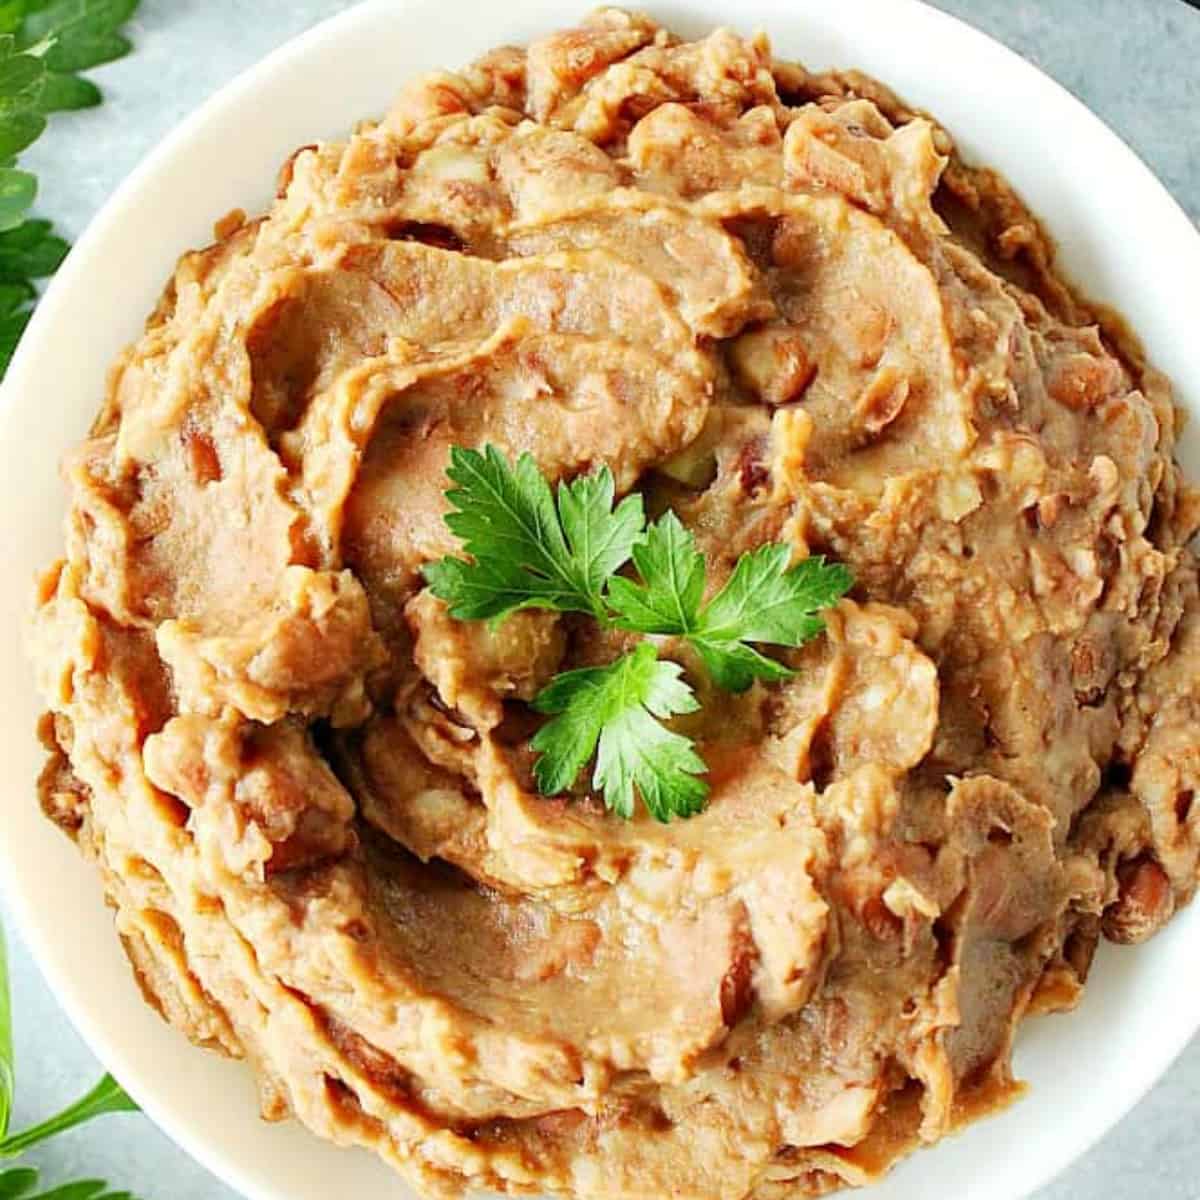 Refried beans in a white bowl.